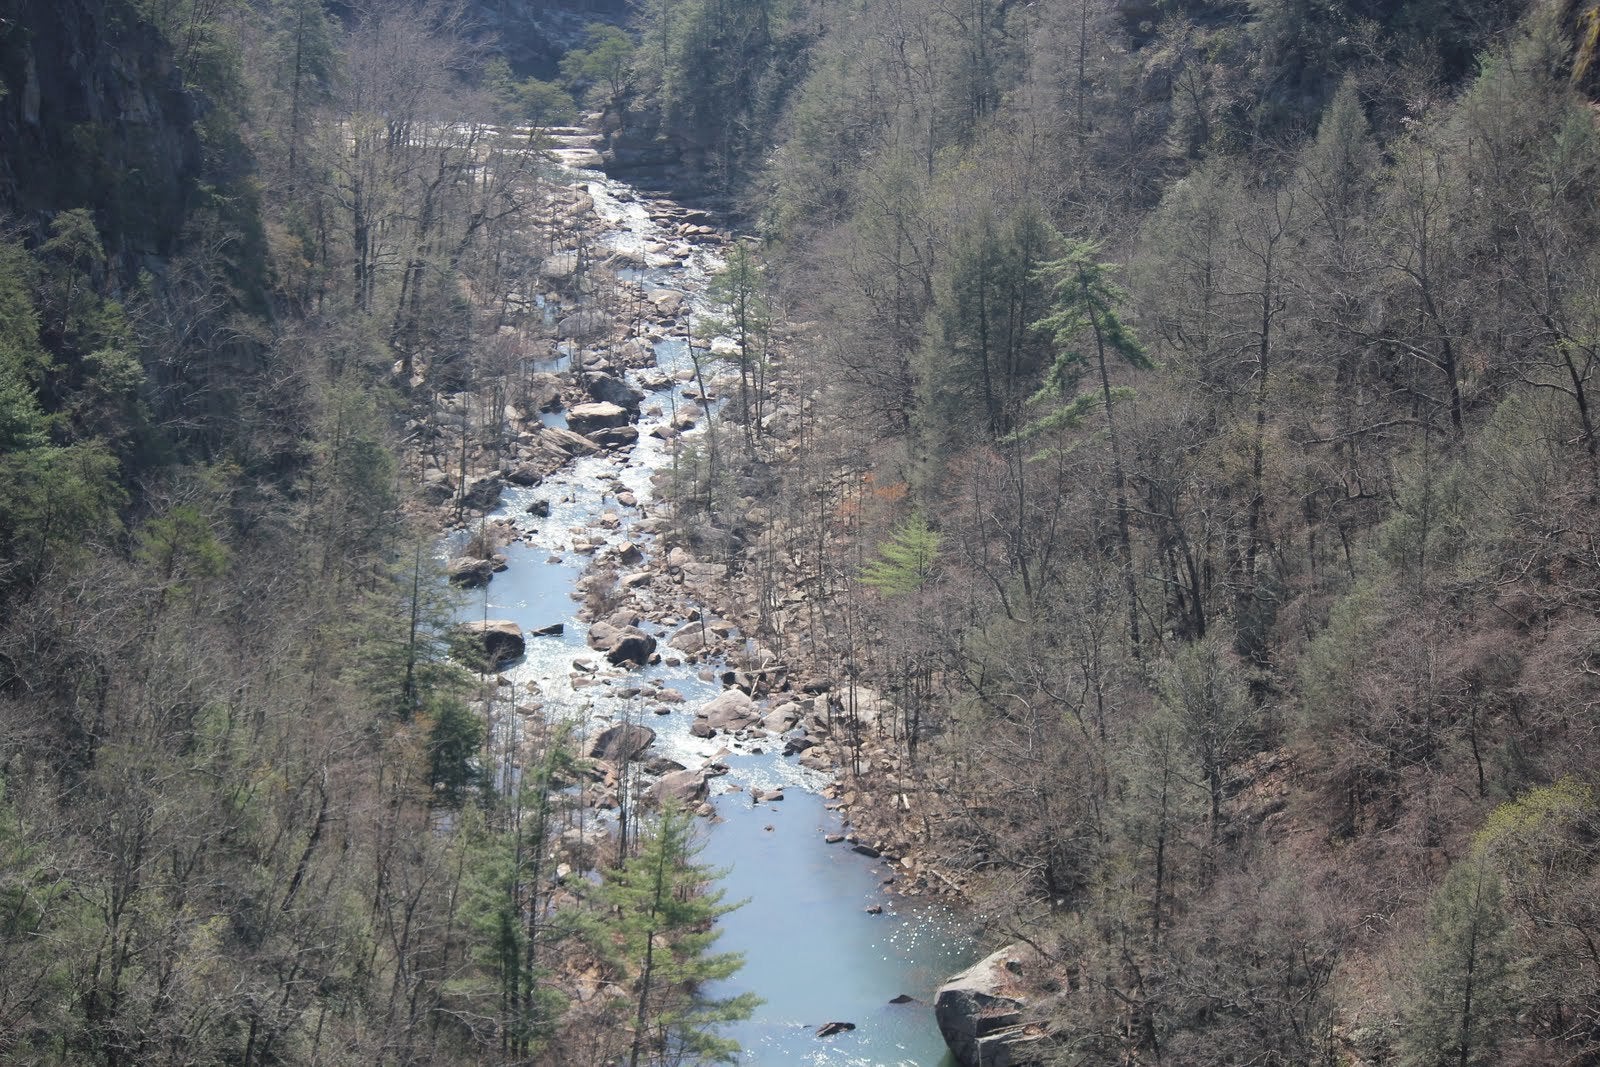 Camper submitted image from Tallulah Gorge State Park - 3